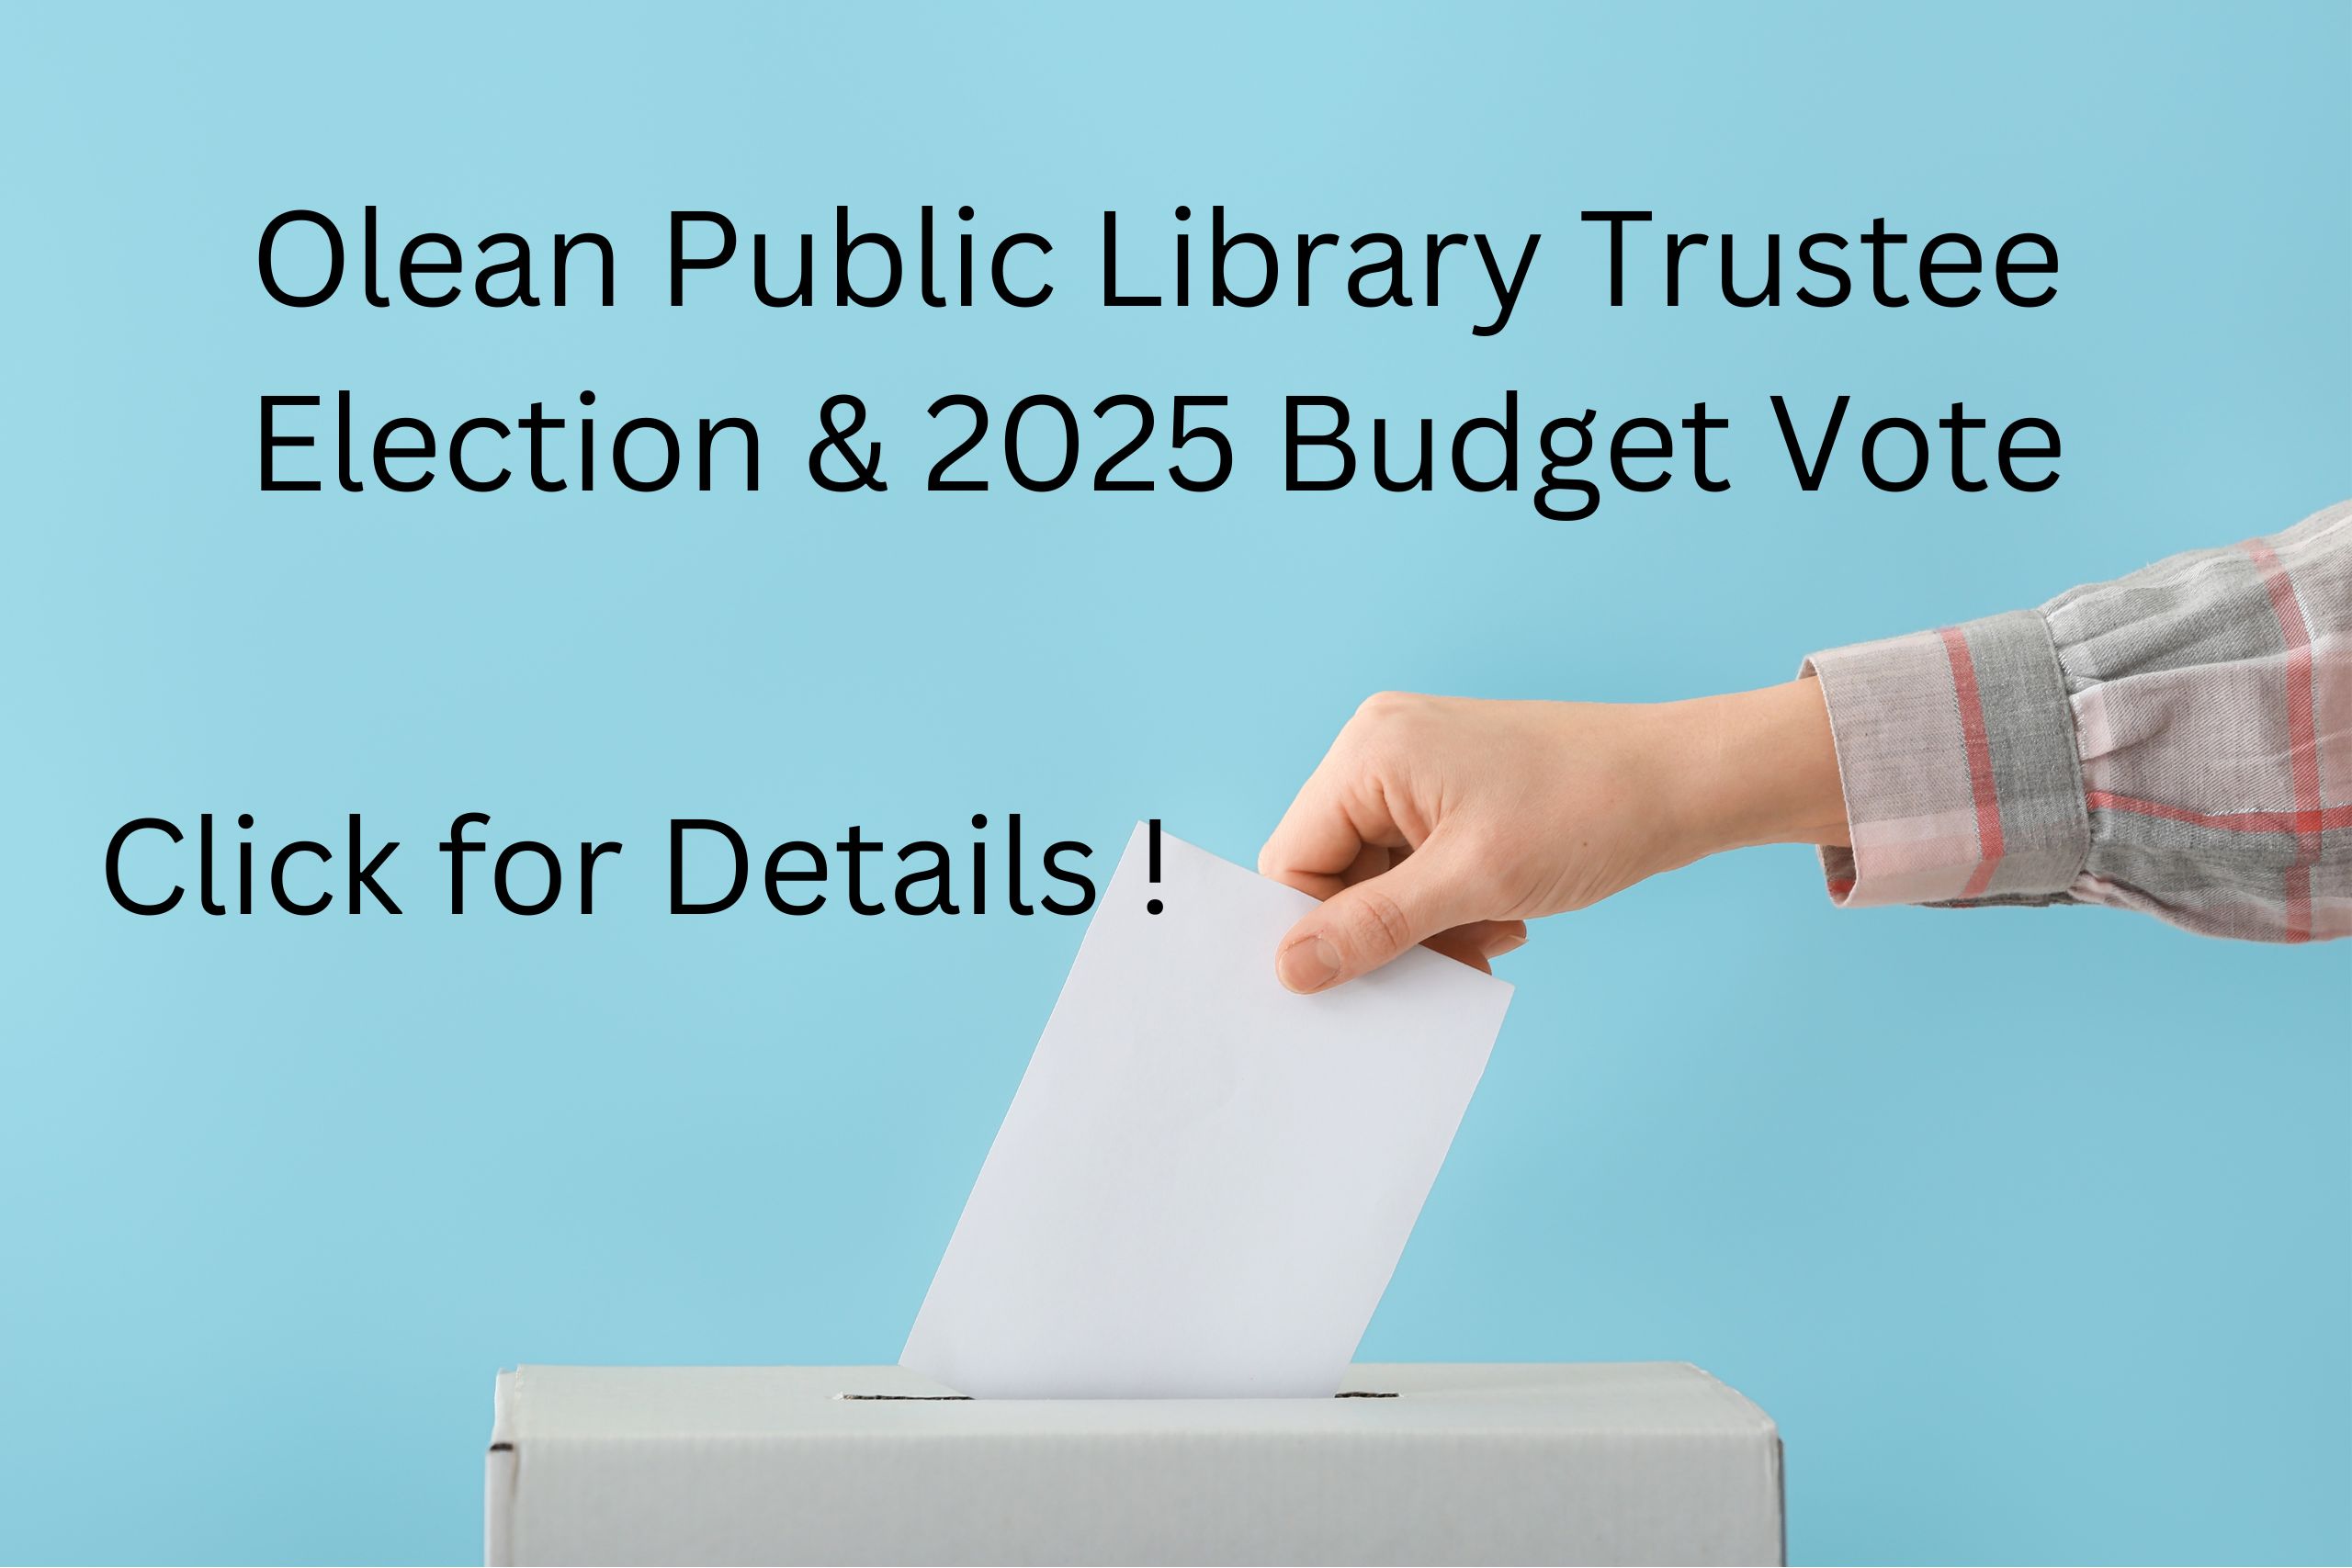 Olean Public Library Trustee Election & 2025 Budget Vote